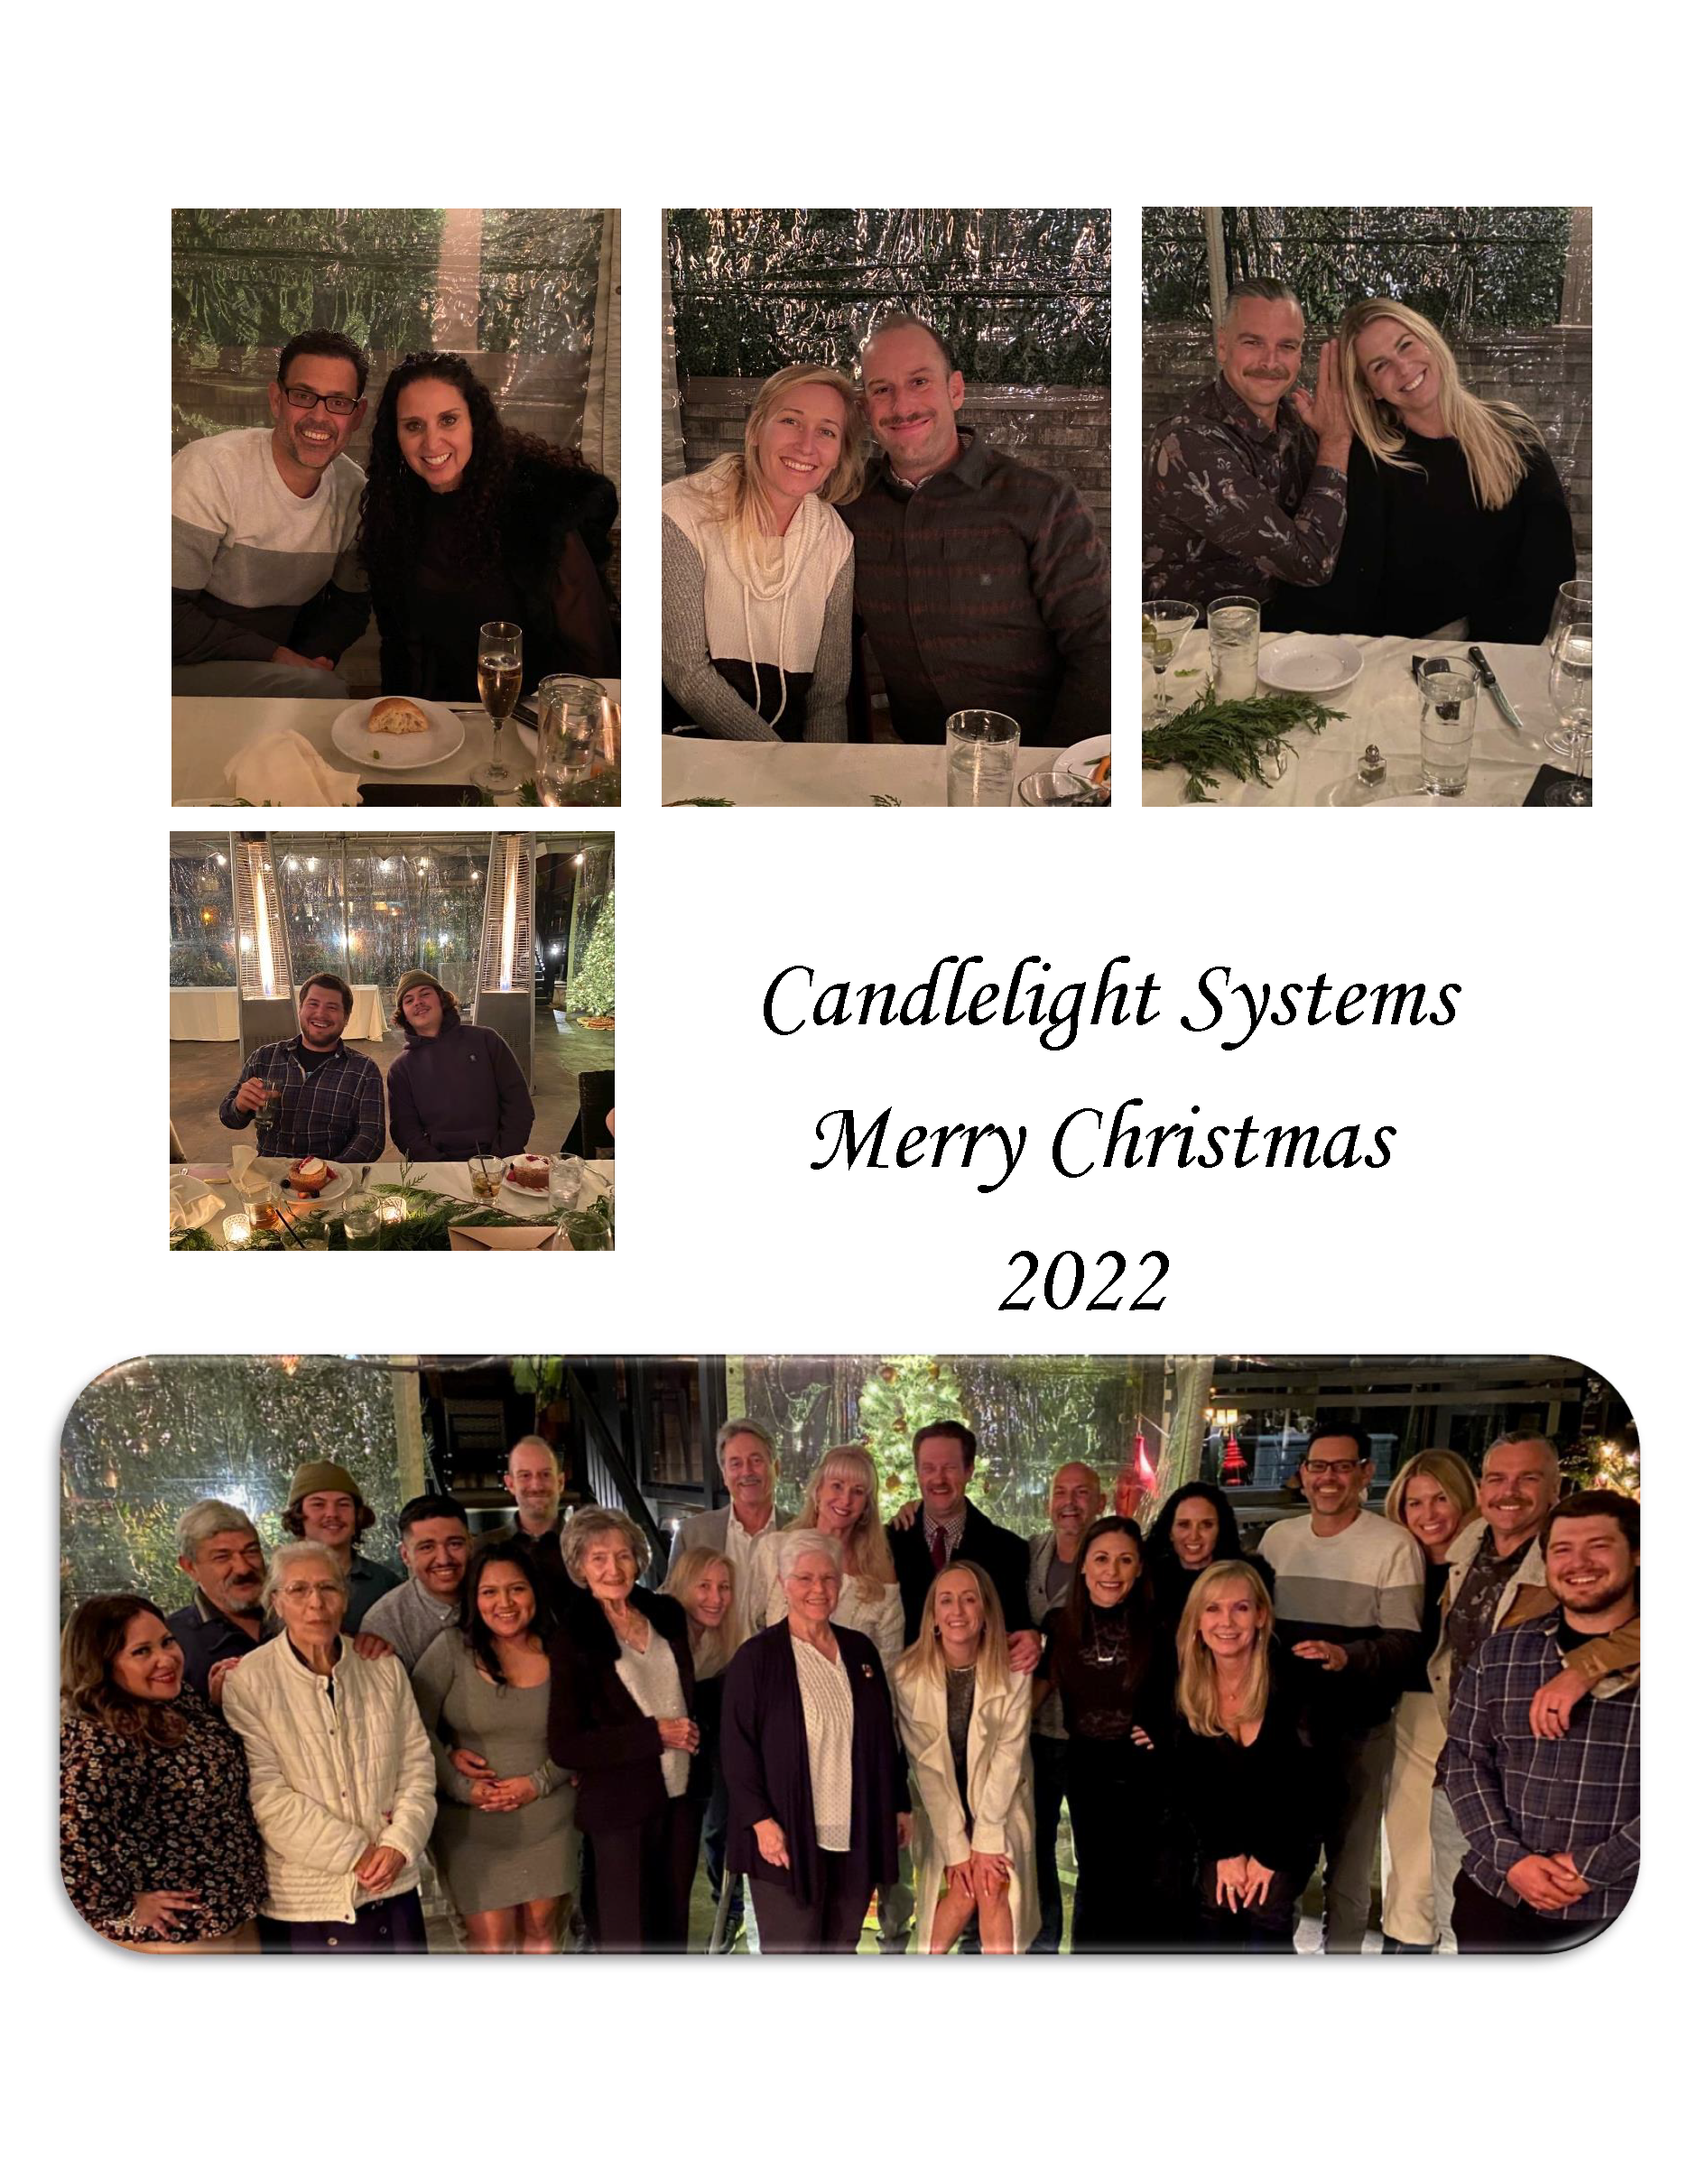 Candlelight Systems Christmas Party (Pg 2)